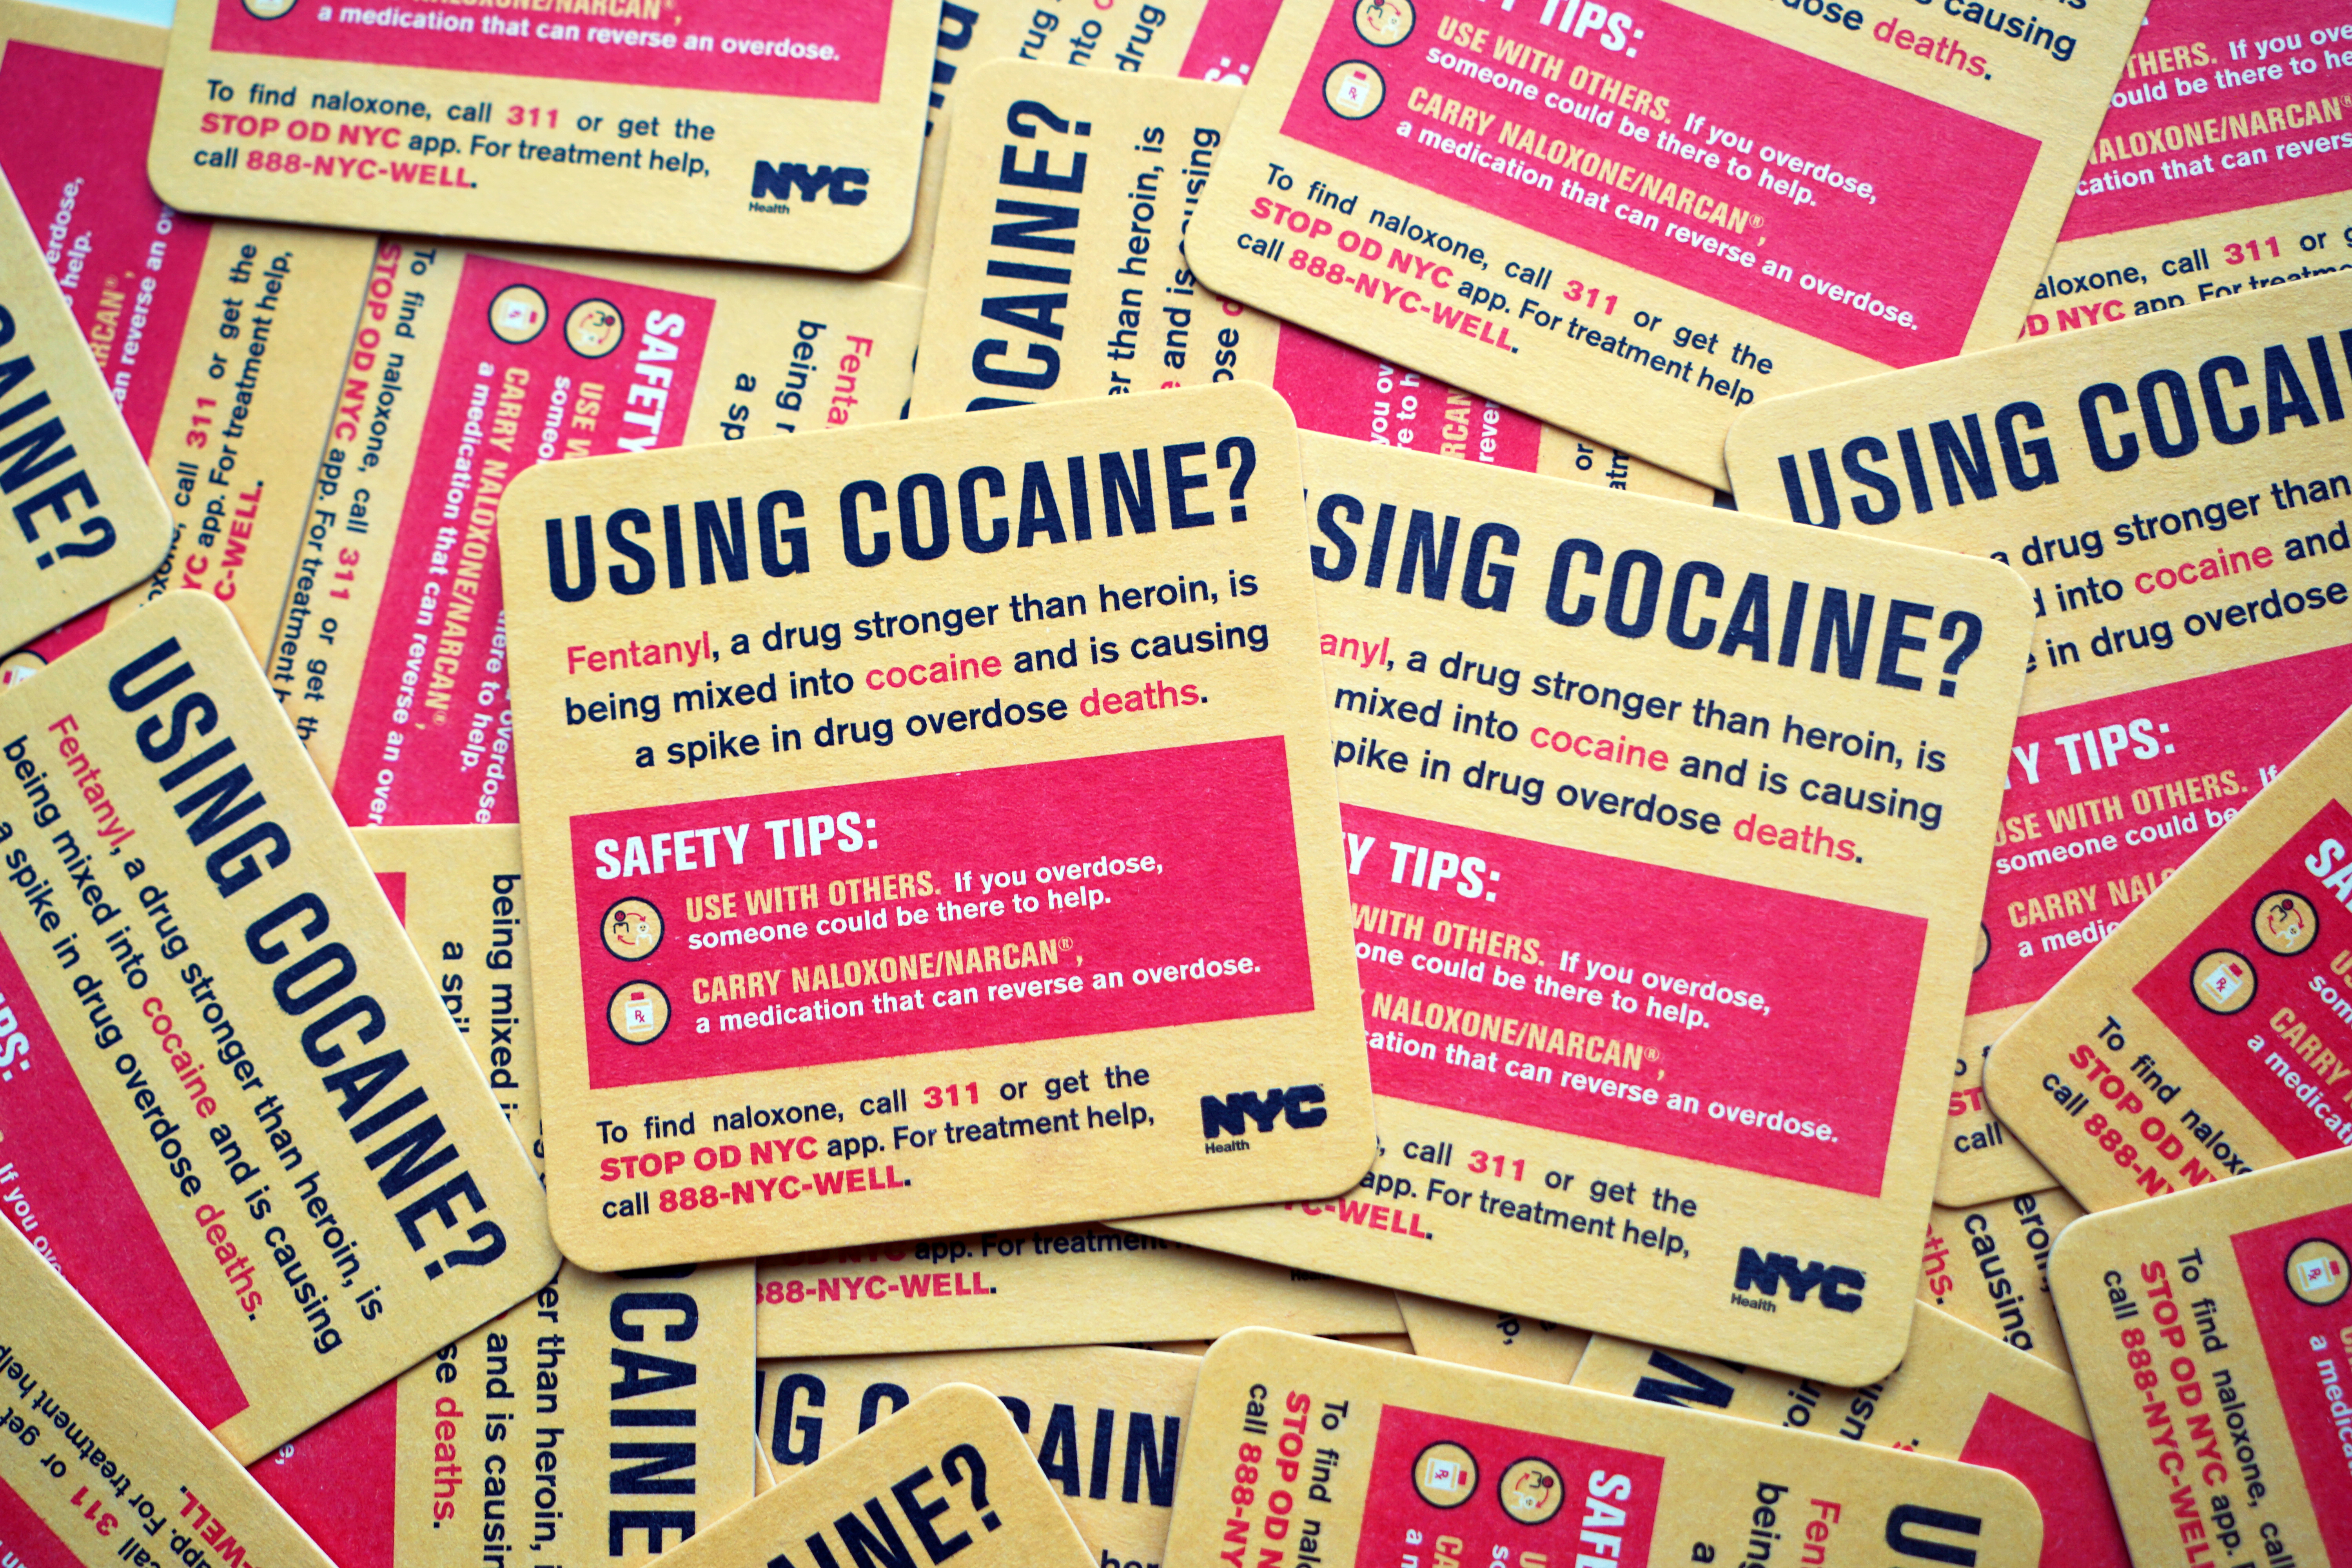 A pile of coasters titled Using Cocaine?. Each coaster provides information about fentanyl, including that it can be added to cocaine without the user knowing. It also provides safety tips for cocaine users.